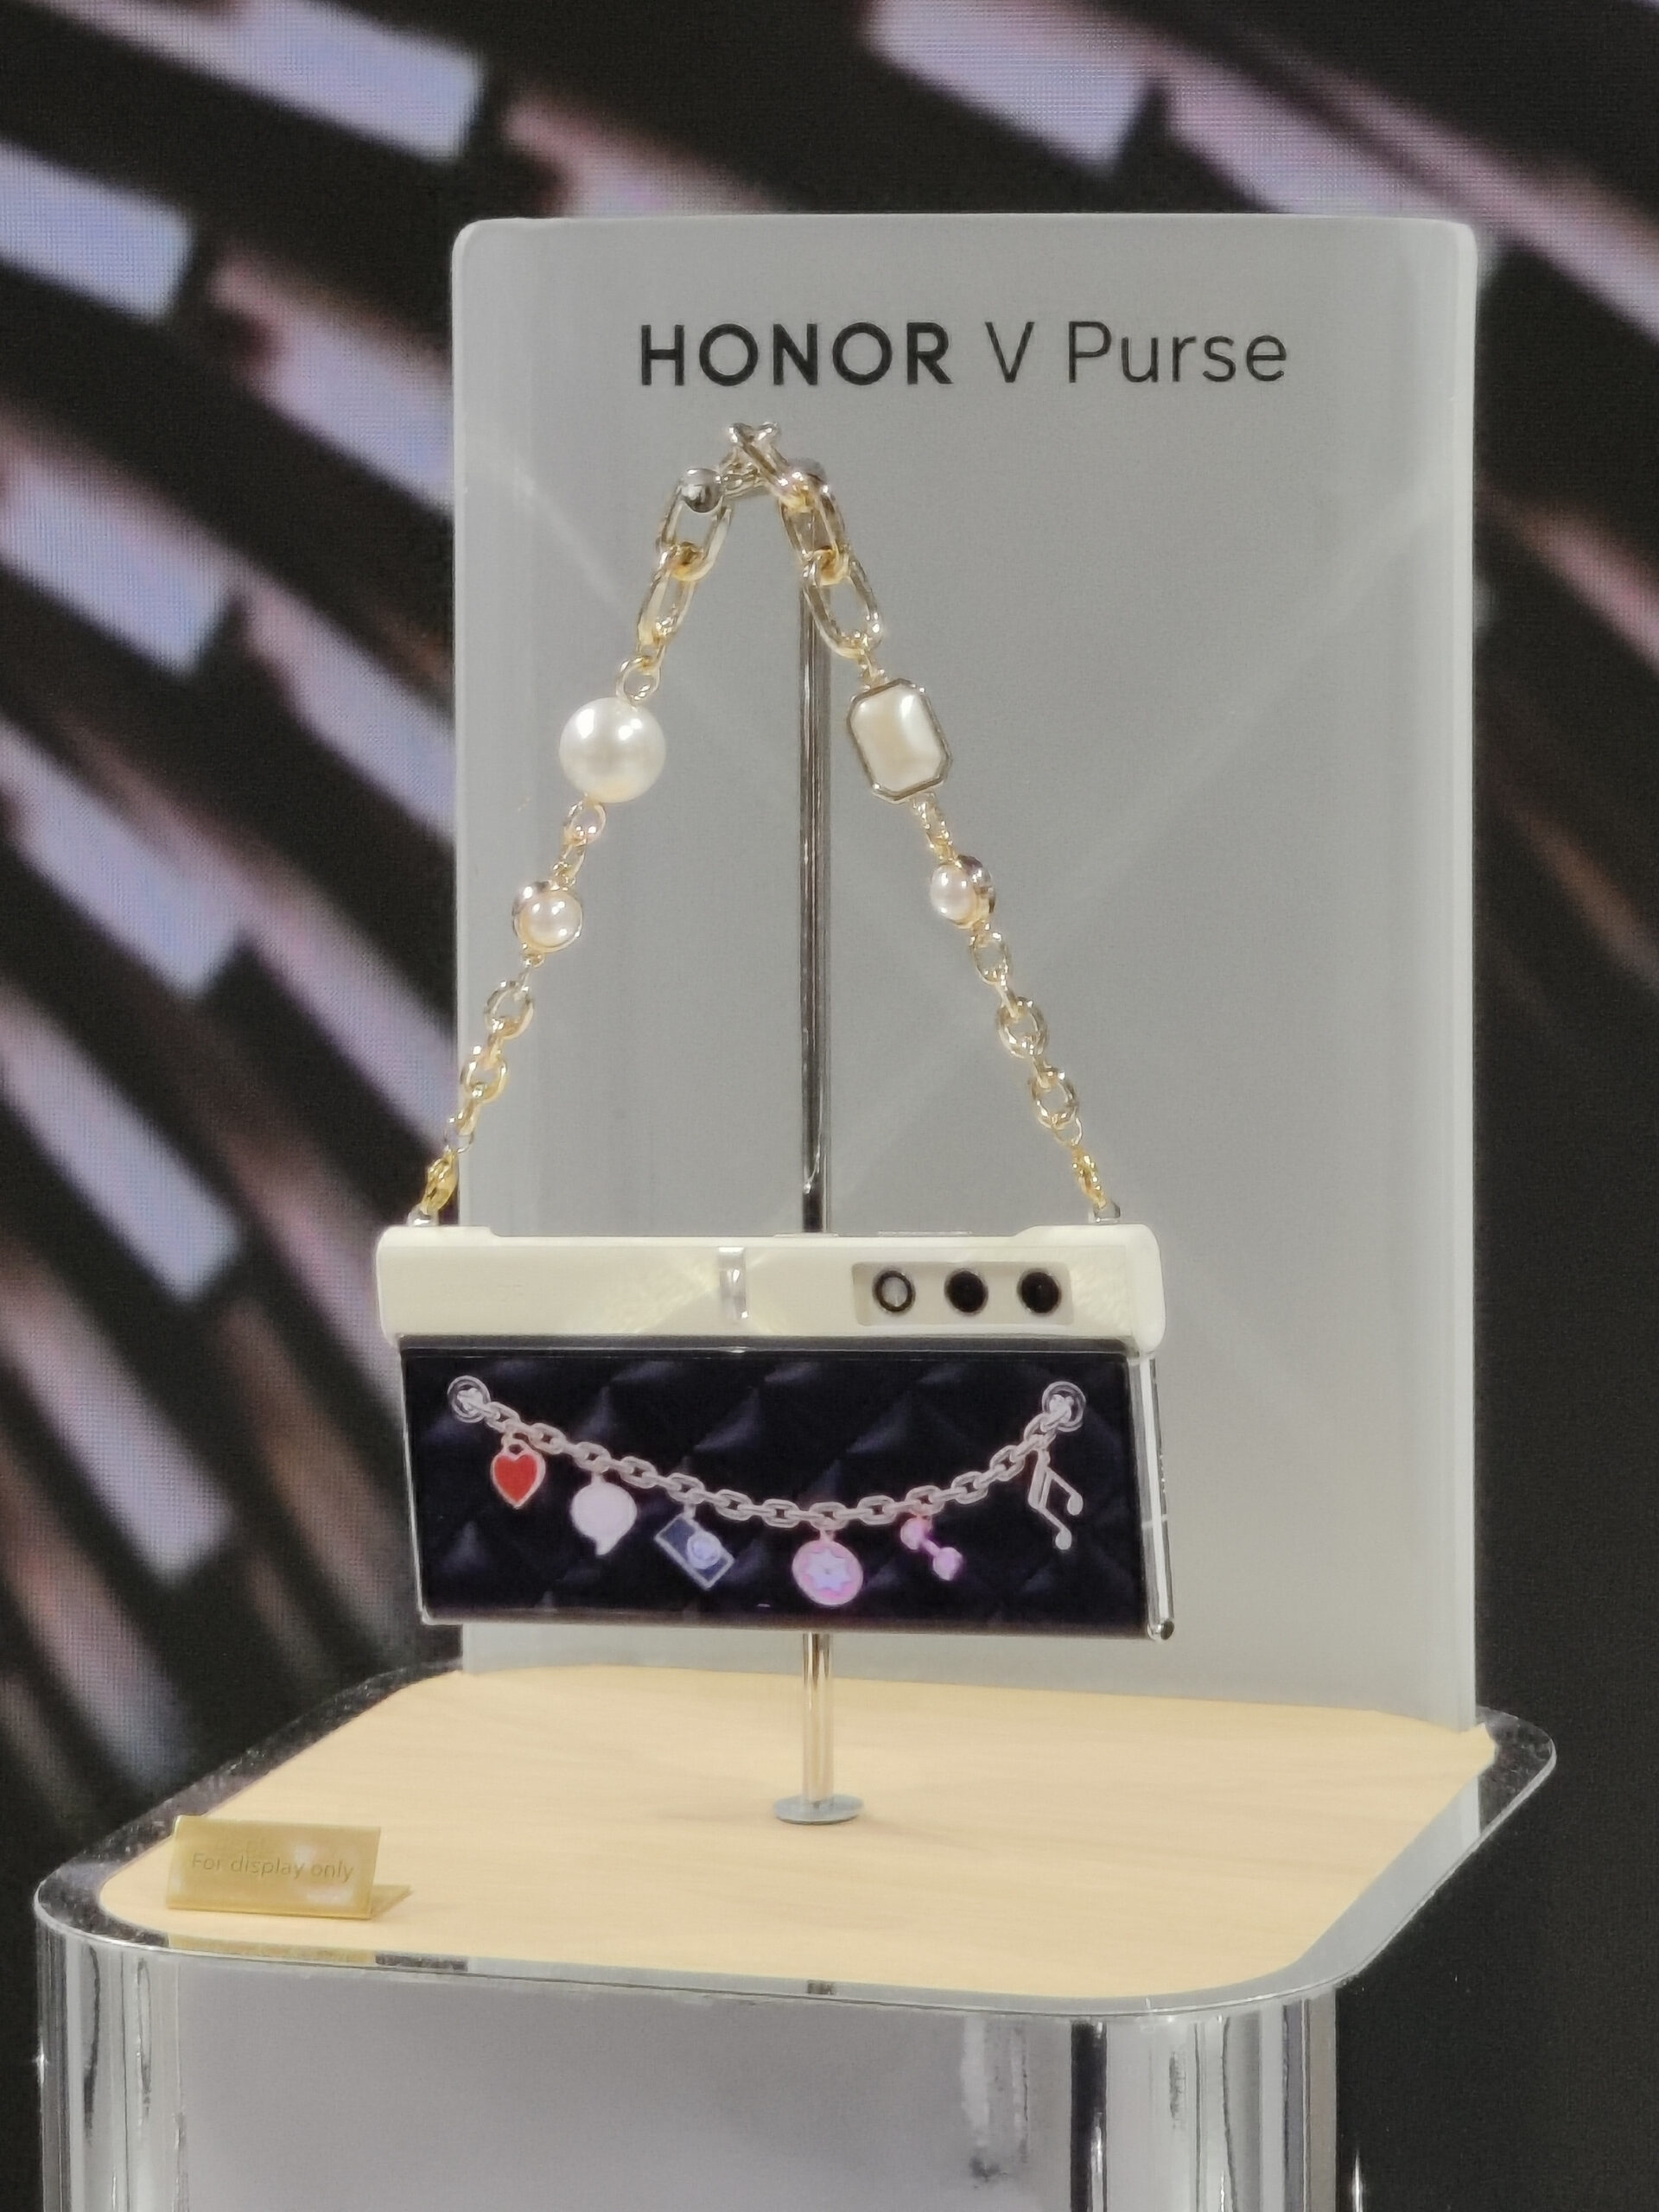 HONOR V Purse Officially Launched In China 